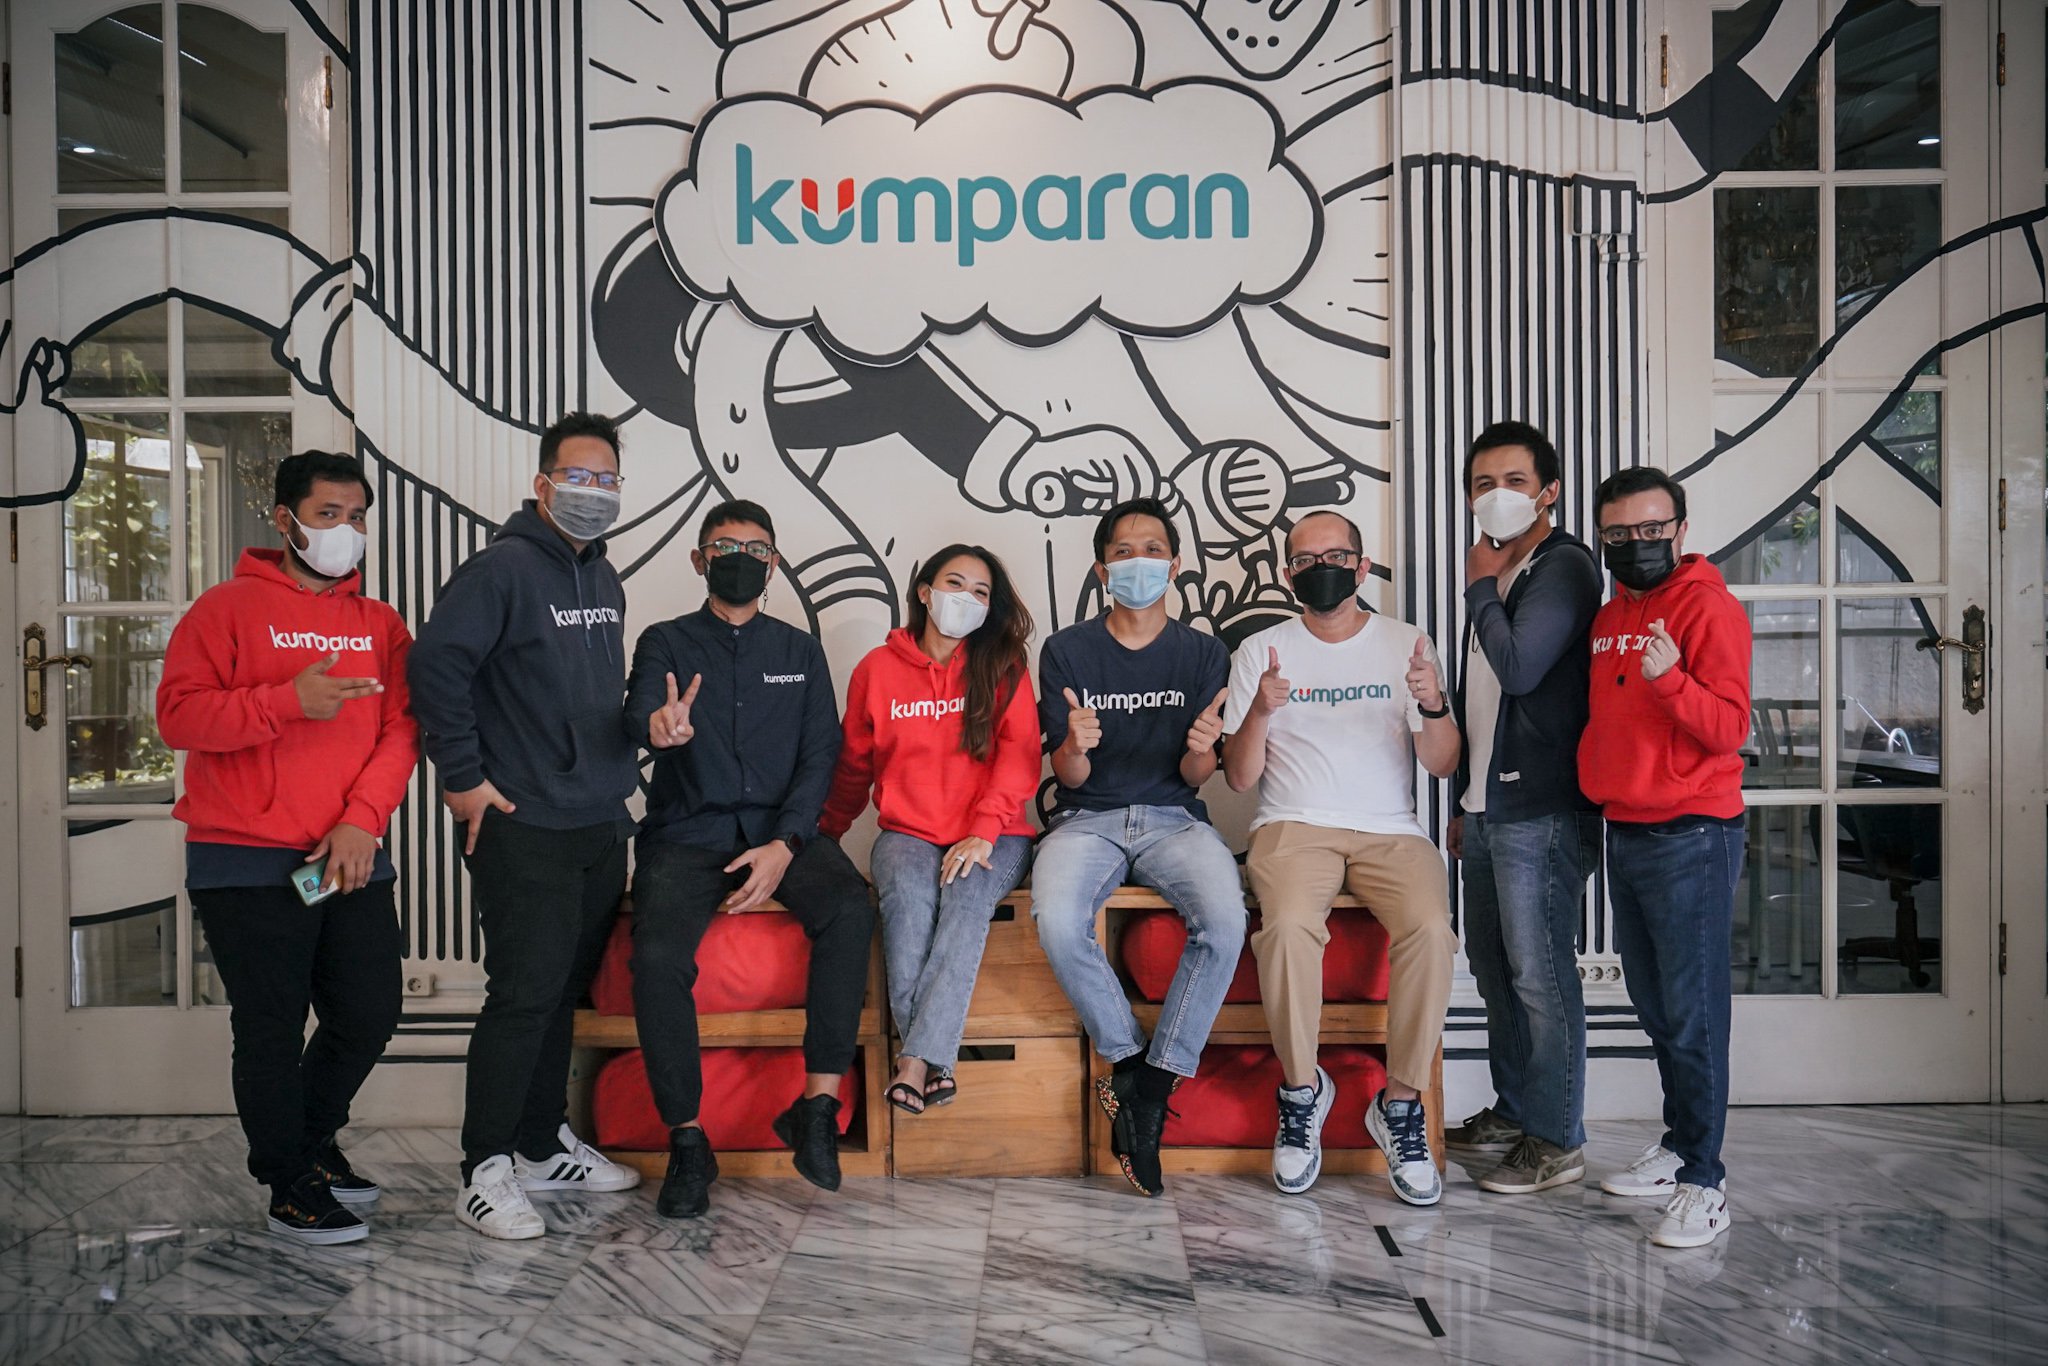 The Kumparan team in front of their logo